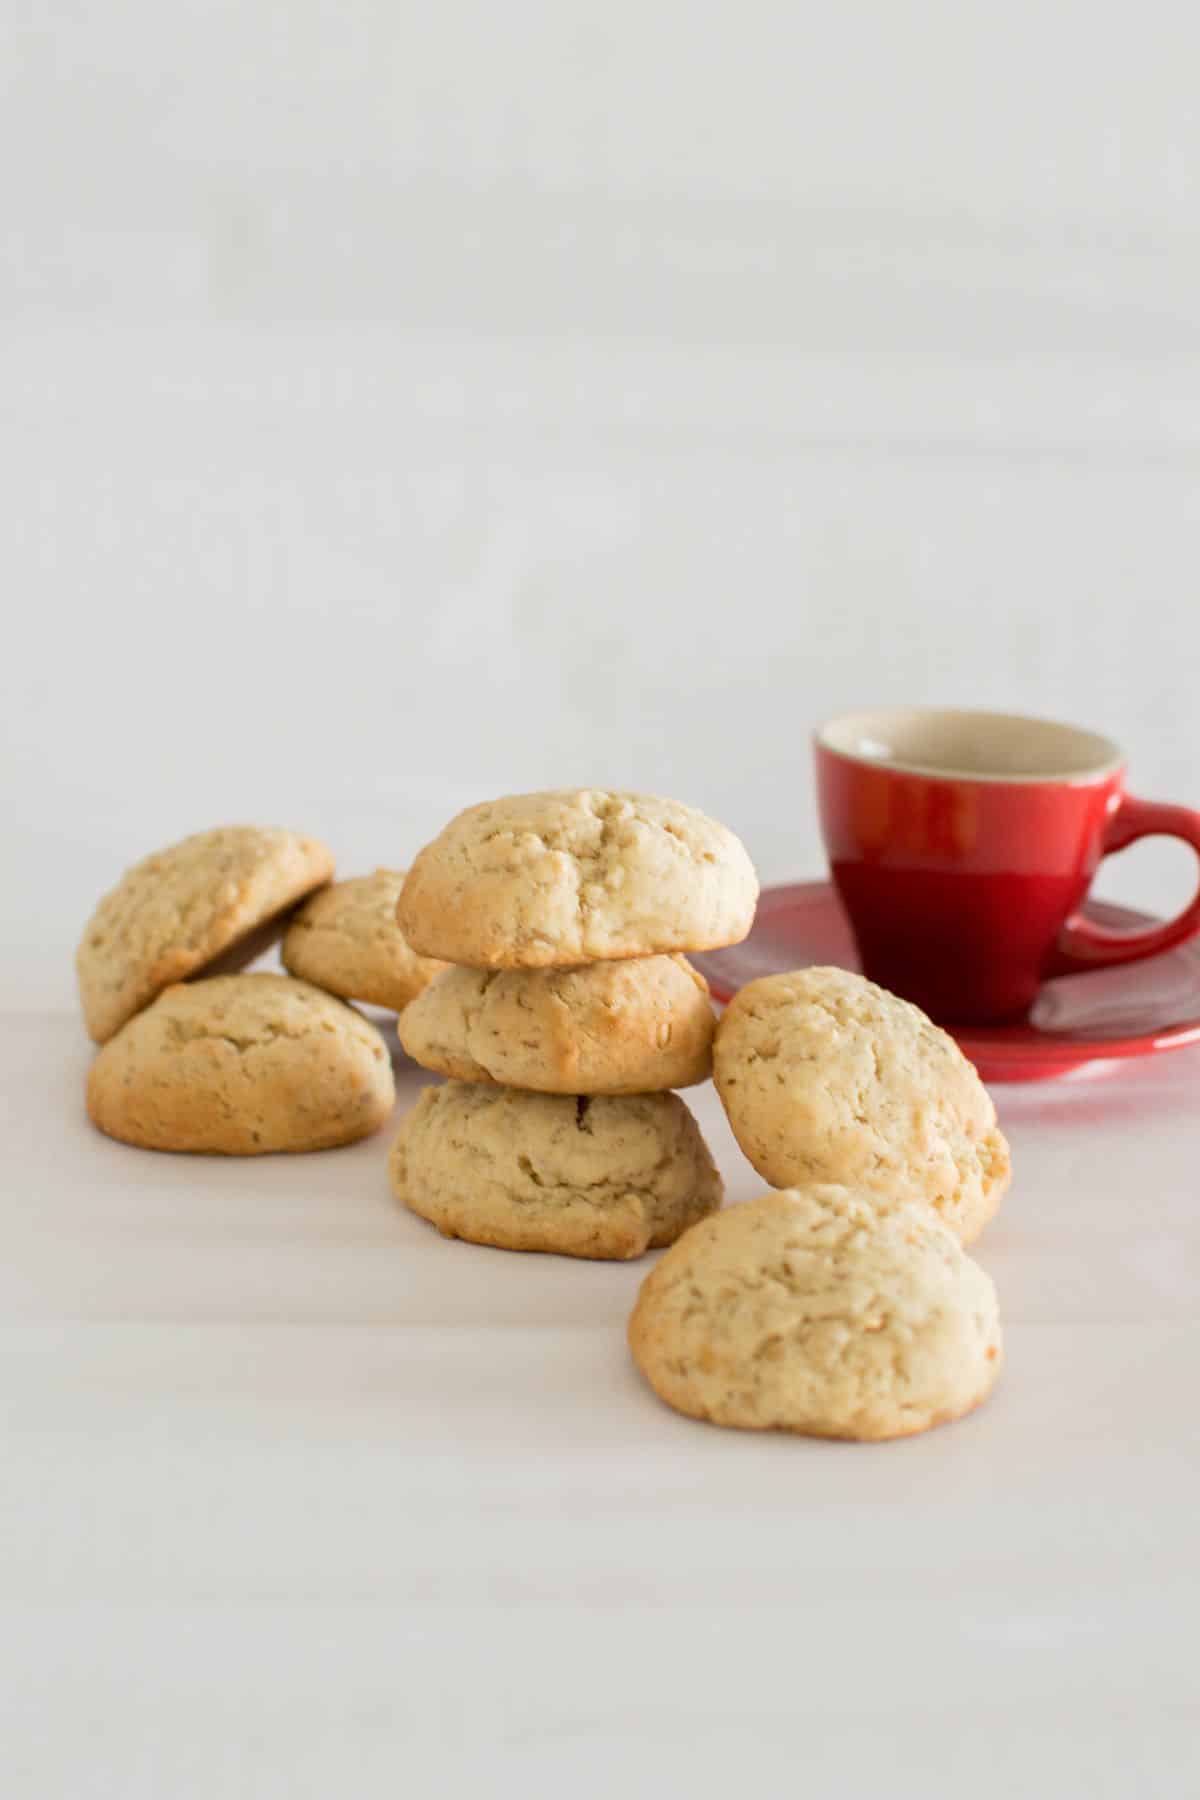 Irish Oatmeal Cookies with a red cup of coffee on the side.